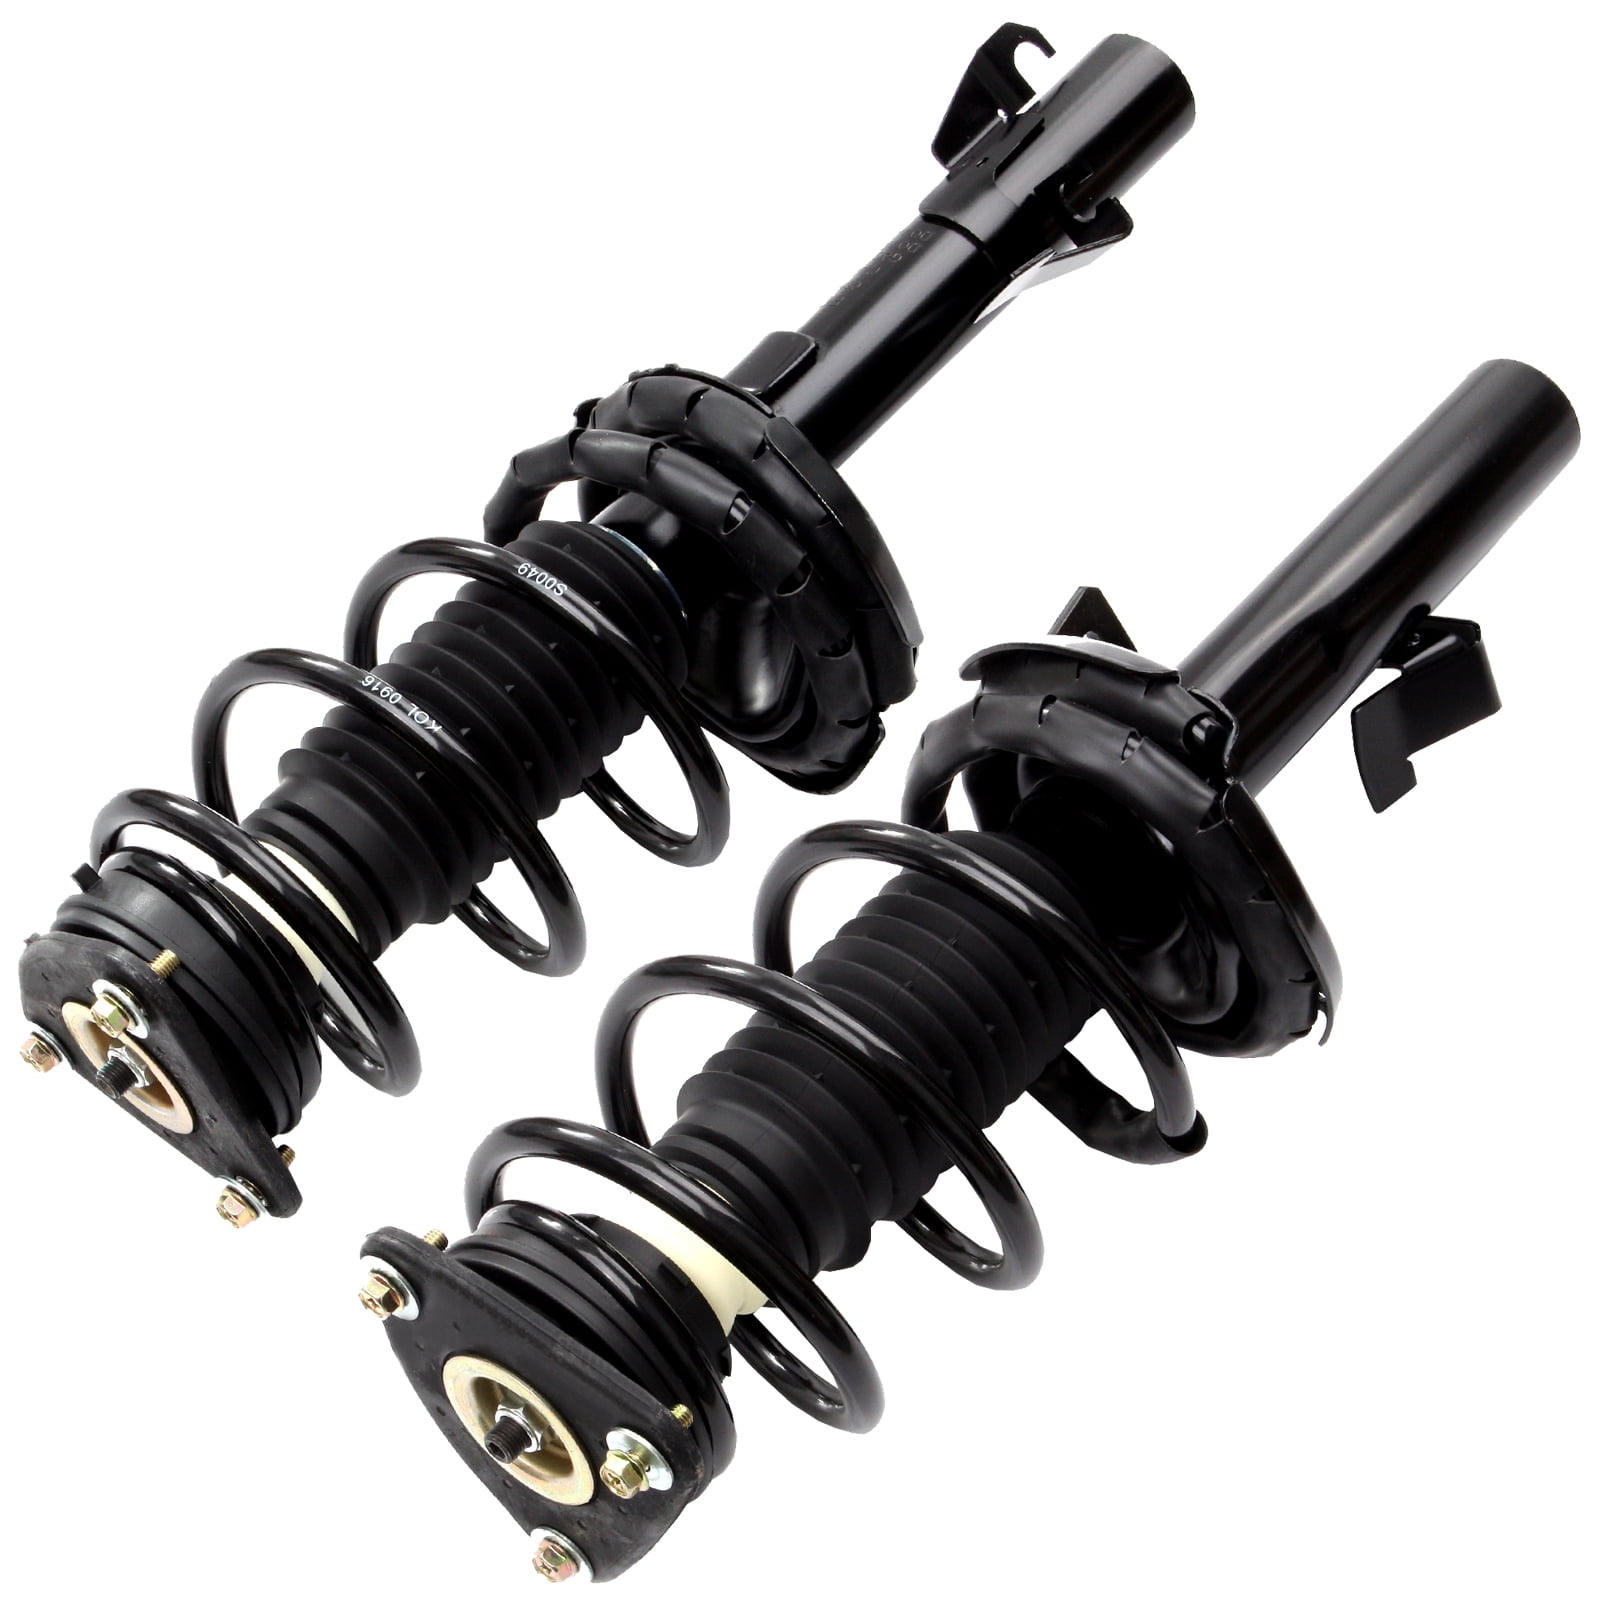 Front Rear Pair ECCPP Quick Strut Complete Struts Assembly Shock Absorber for 2004 2005 2006 2007 2008 2009 2010 2011 2012 2013 Nissan Titan 